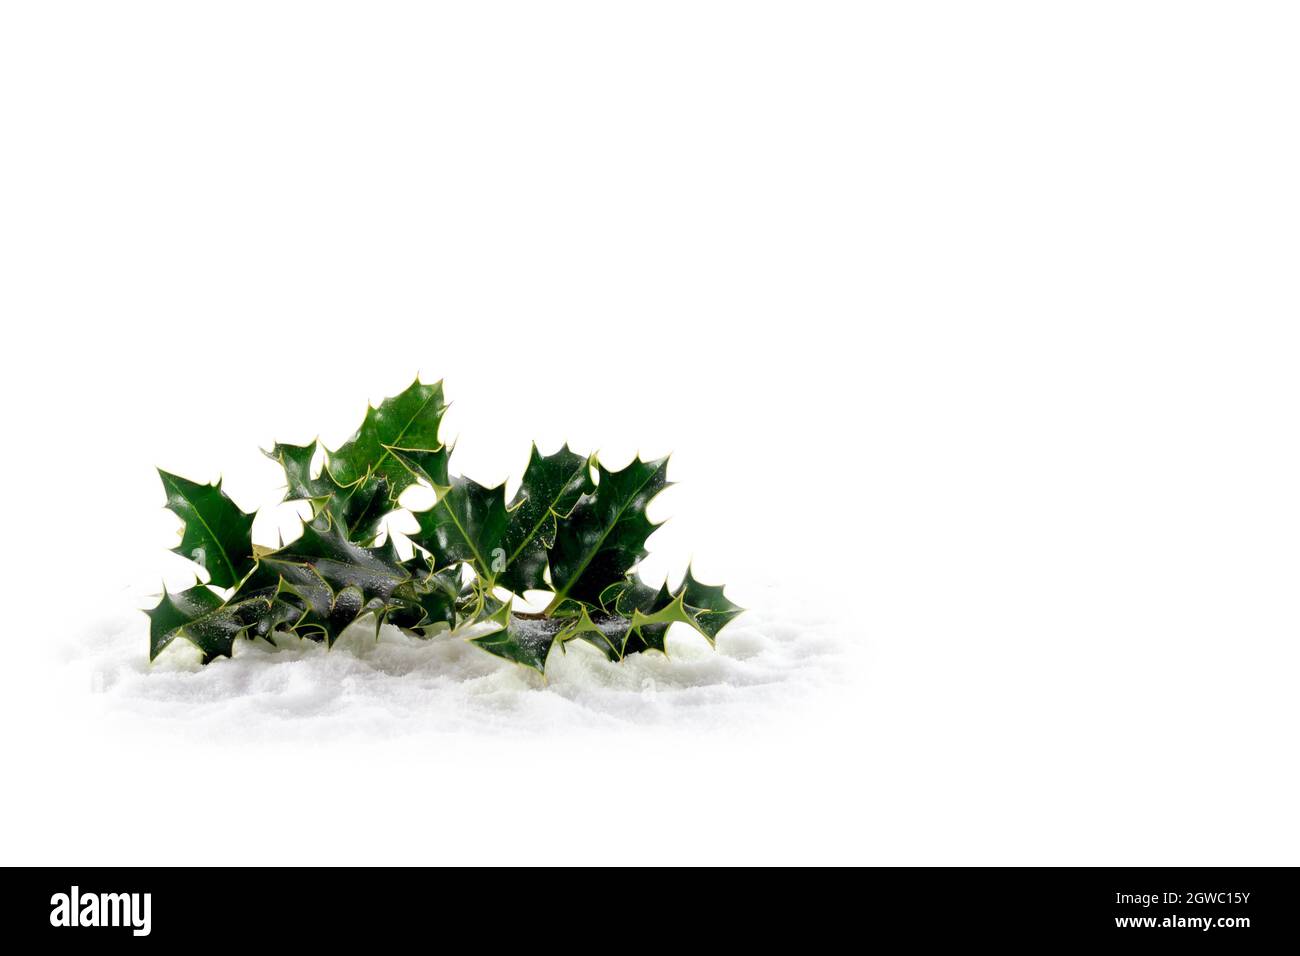 Sprig of Holly lying on artificial snow isolated on a white background Stock Photo